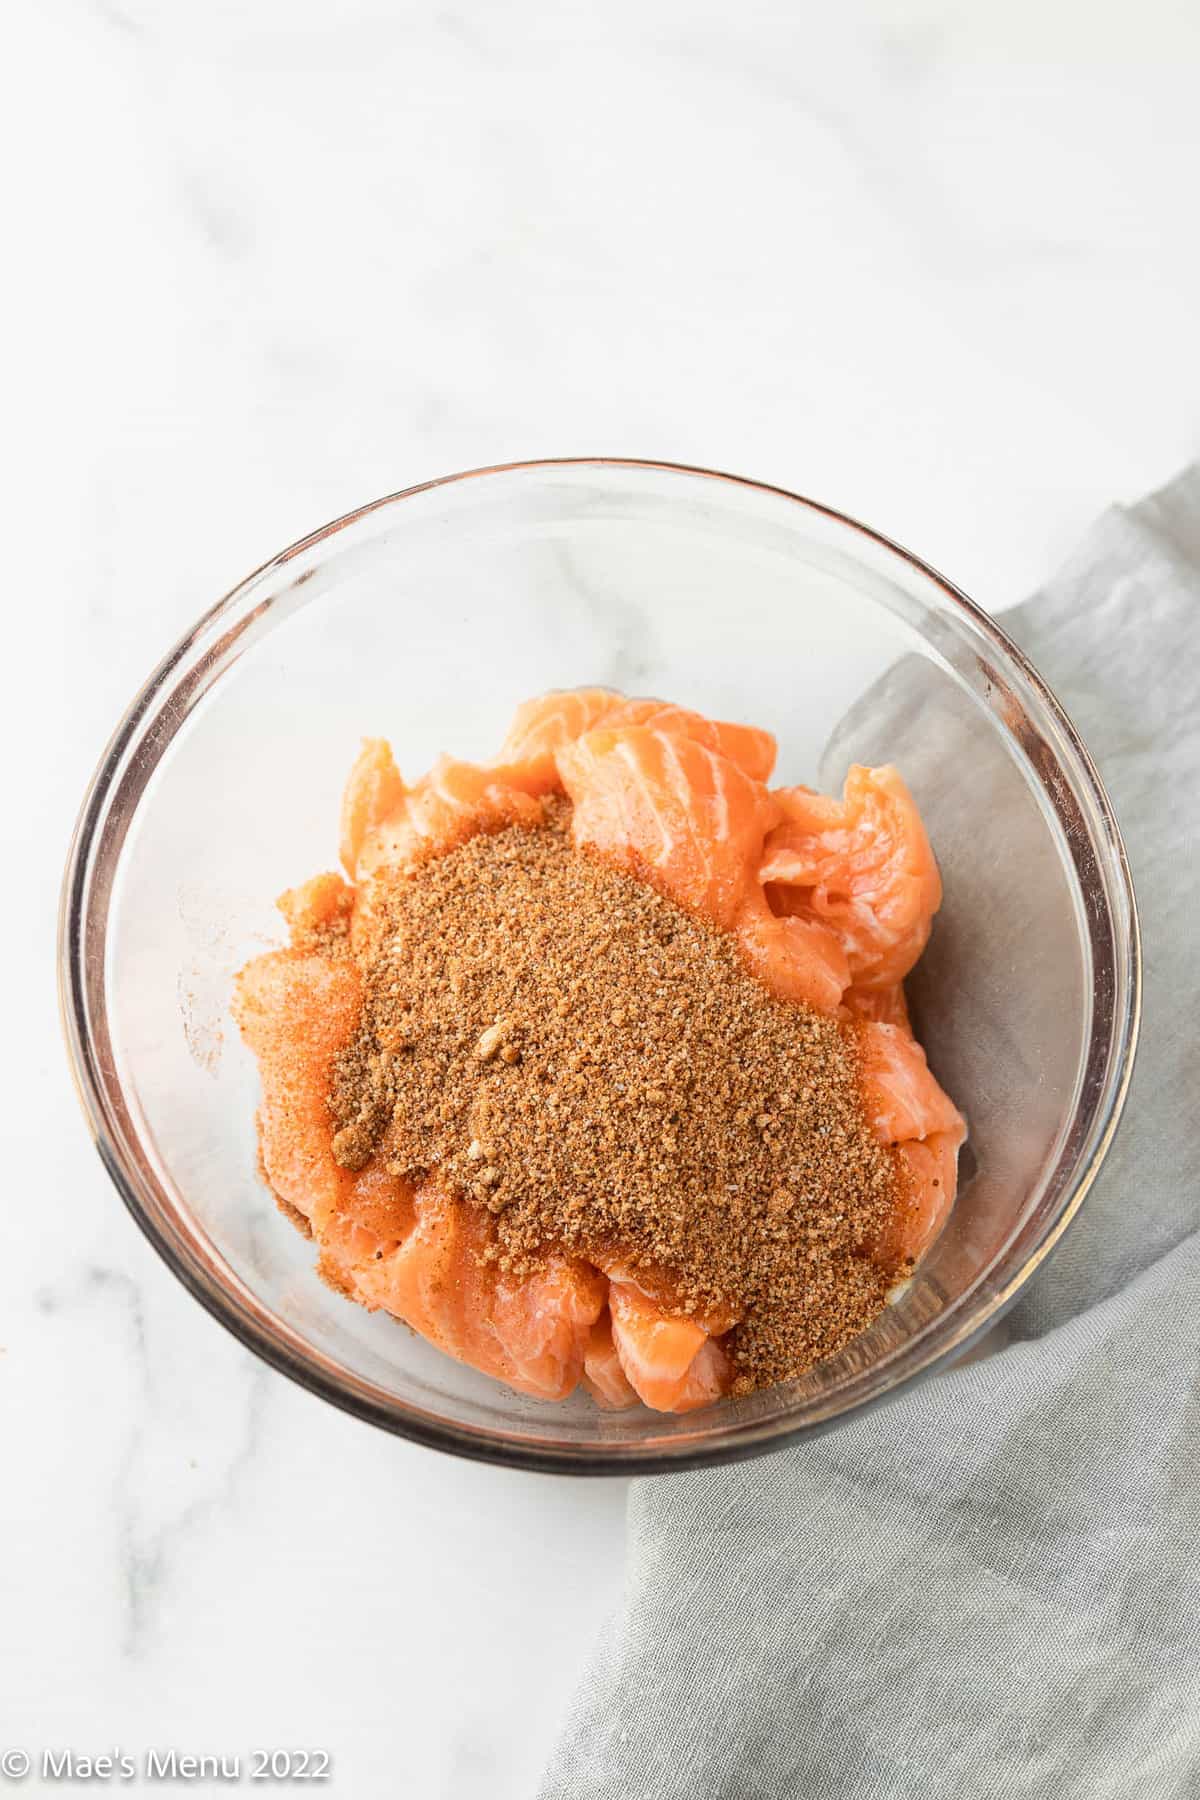 A glass bowl of slices of salmon with brown sugar seasoning on top.